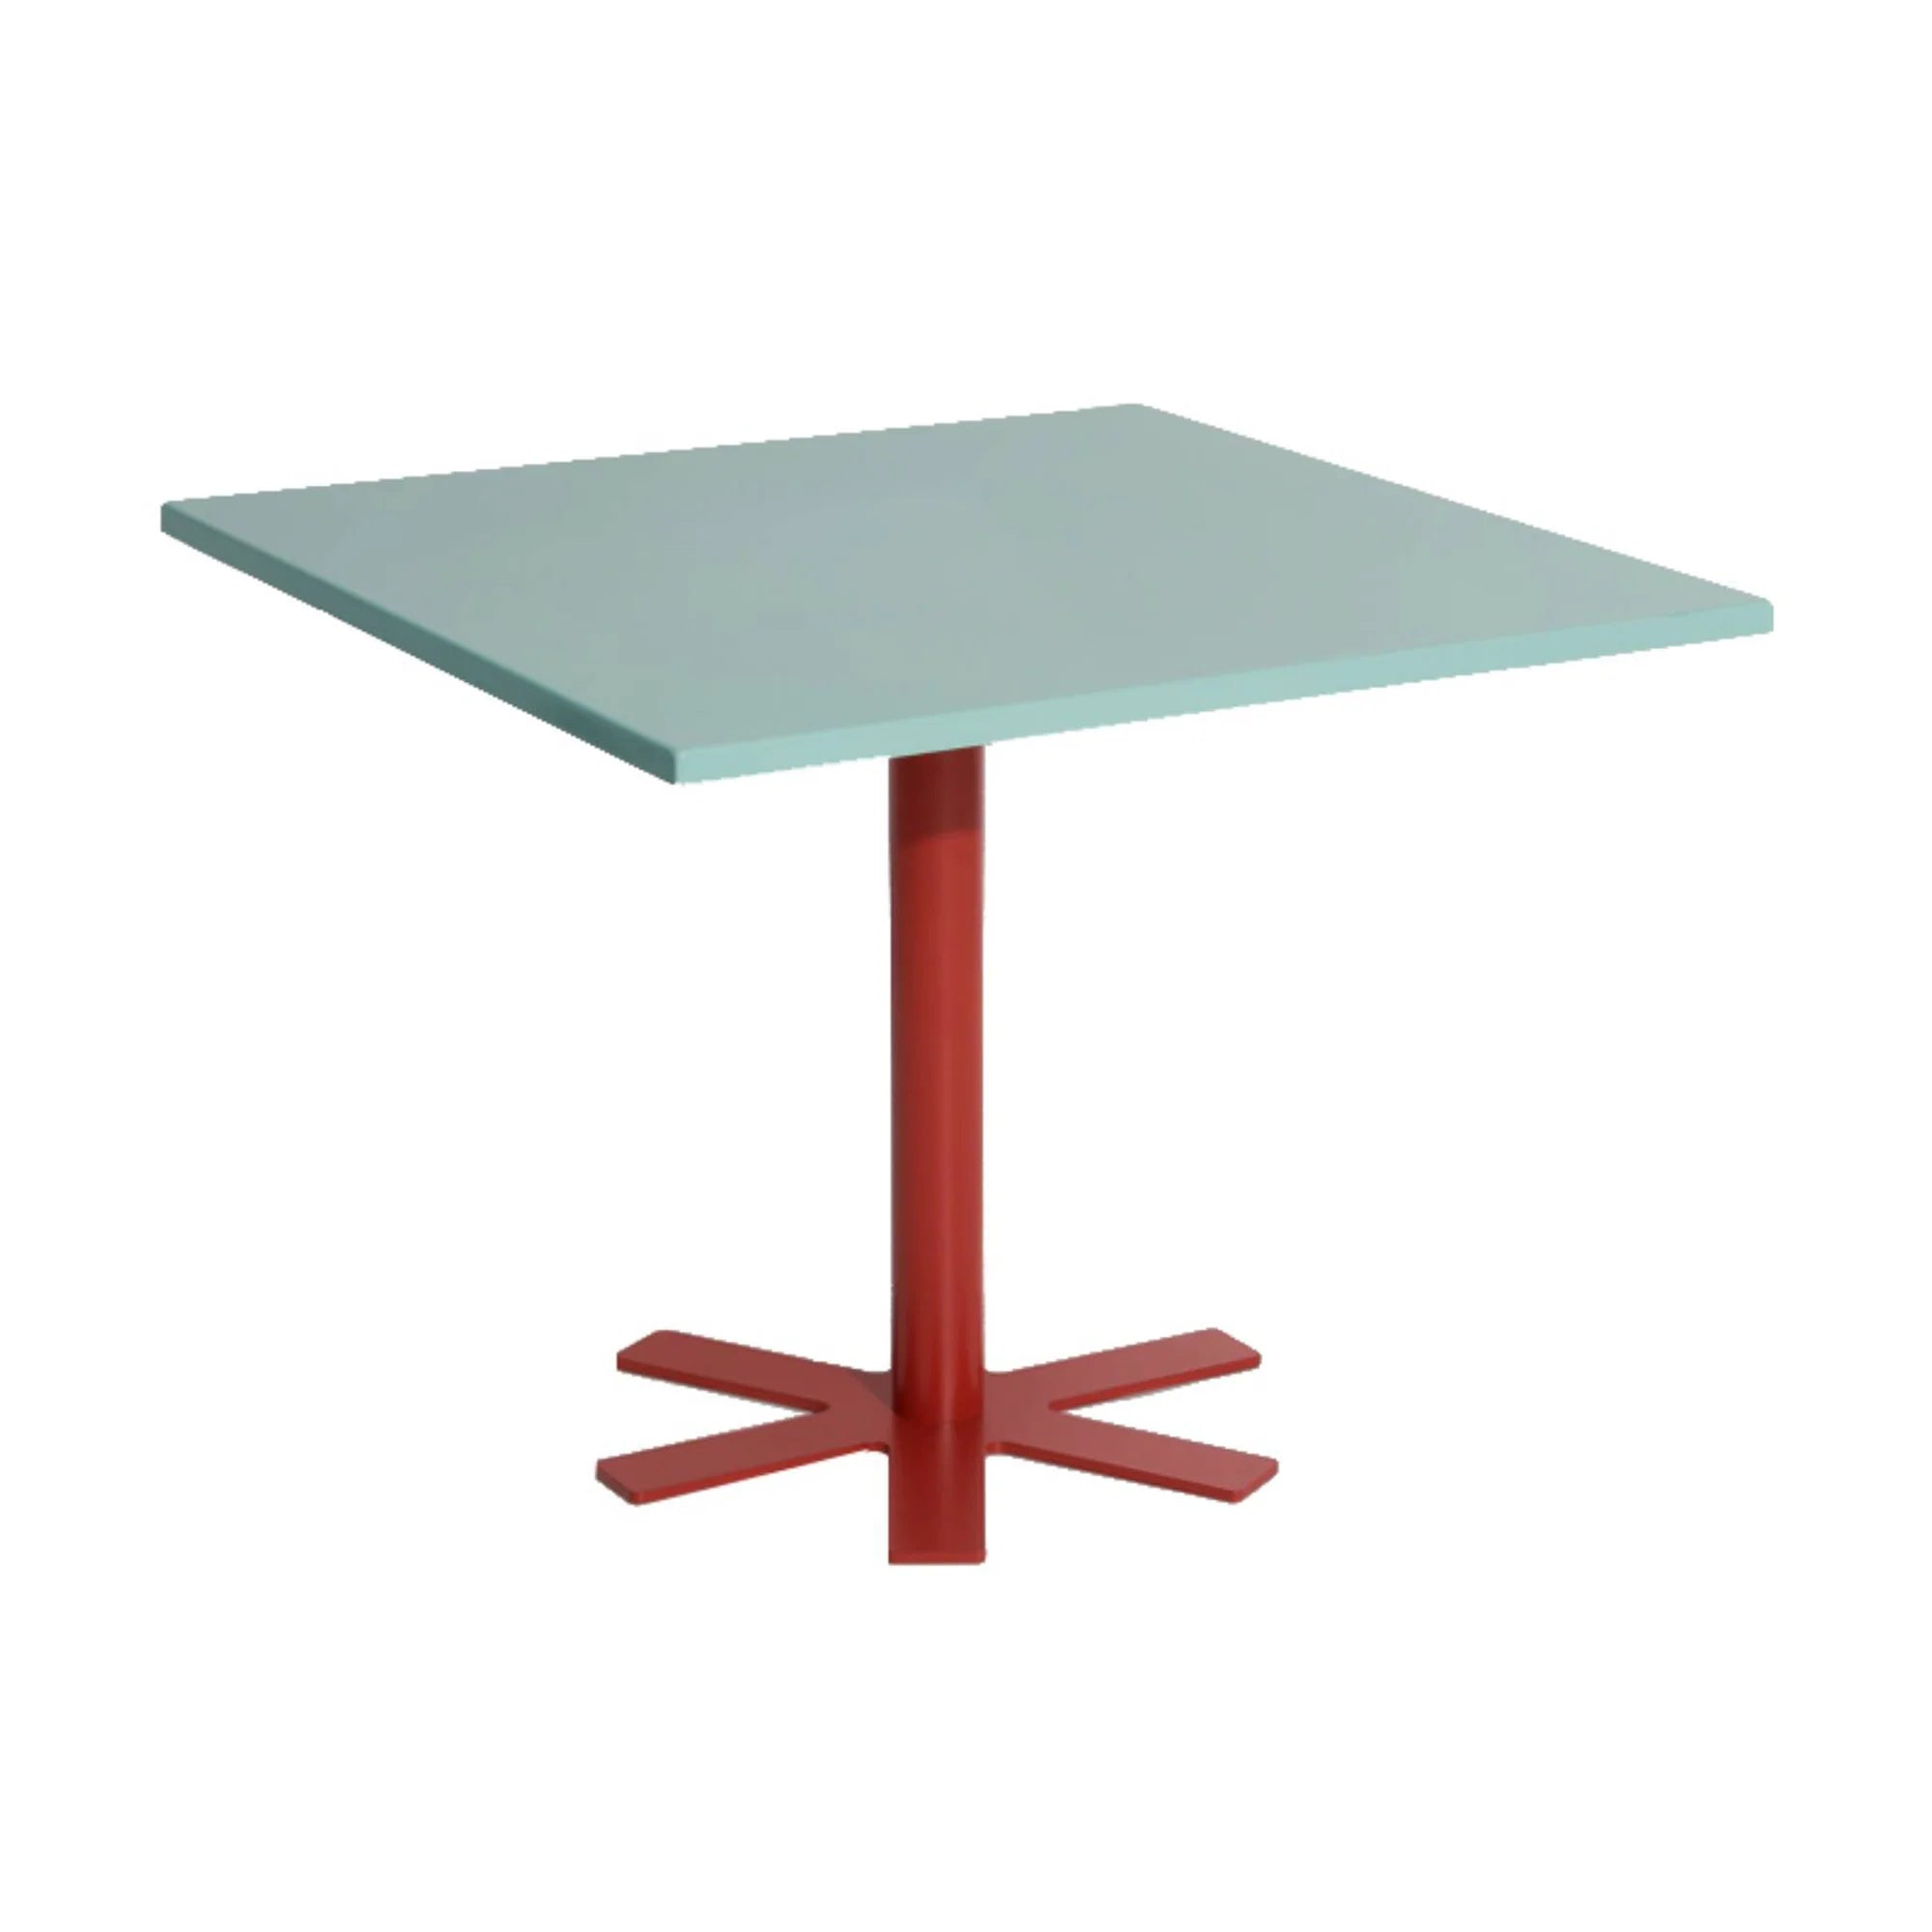 PARROT SMALL - Dining Table